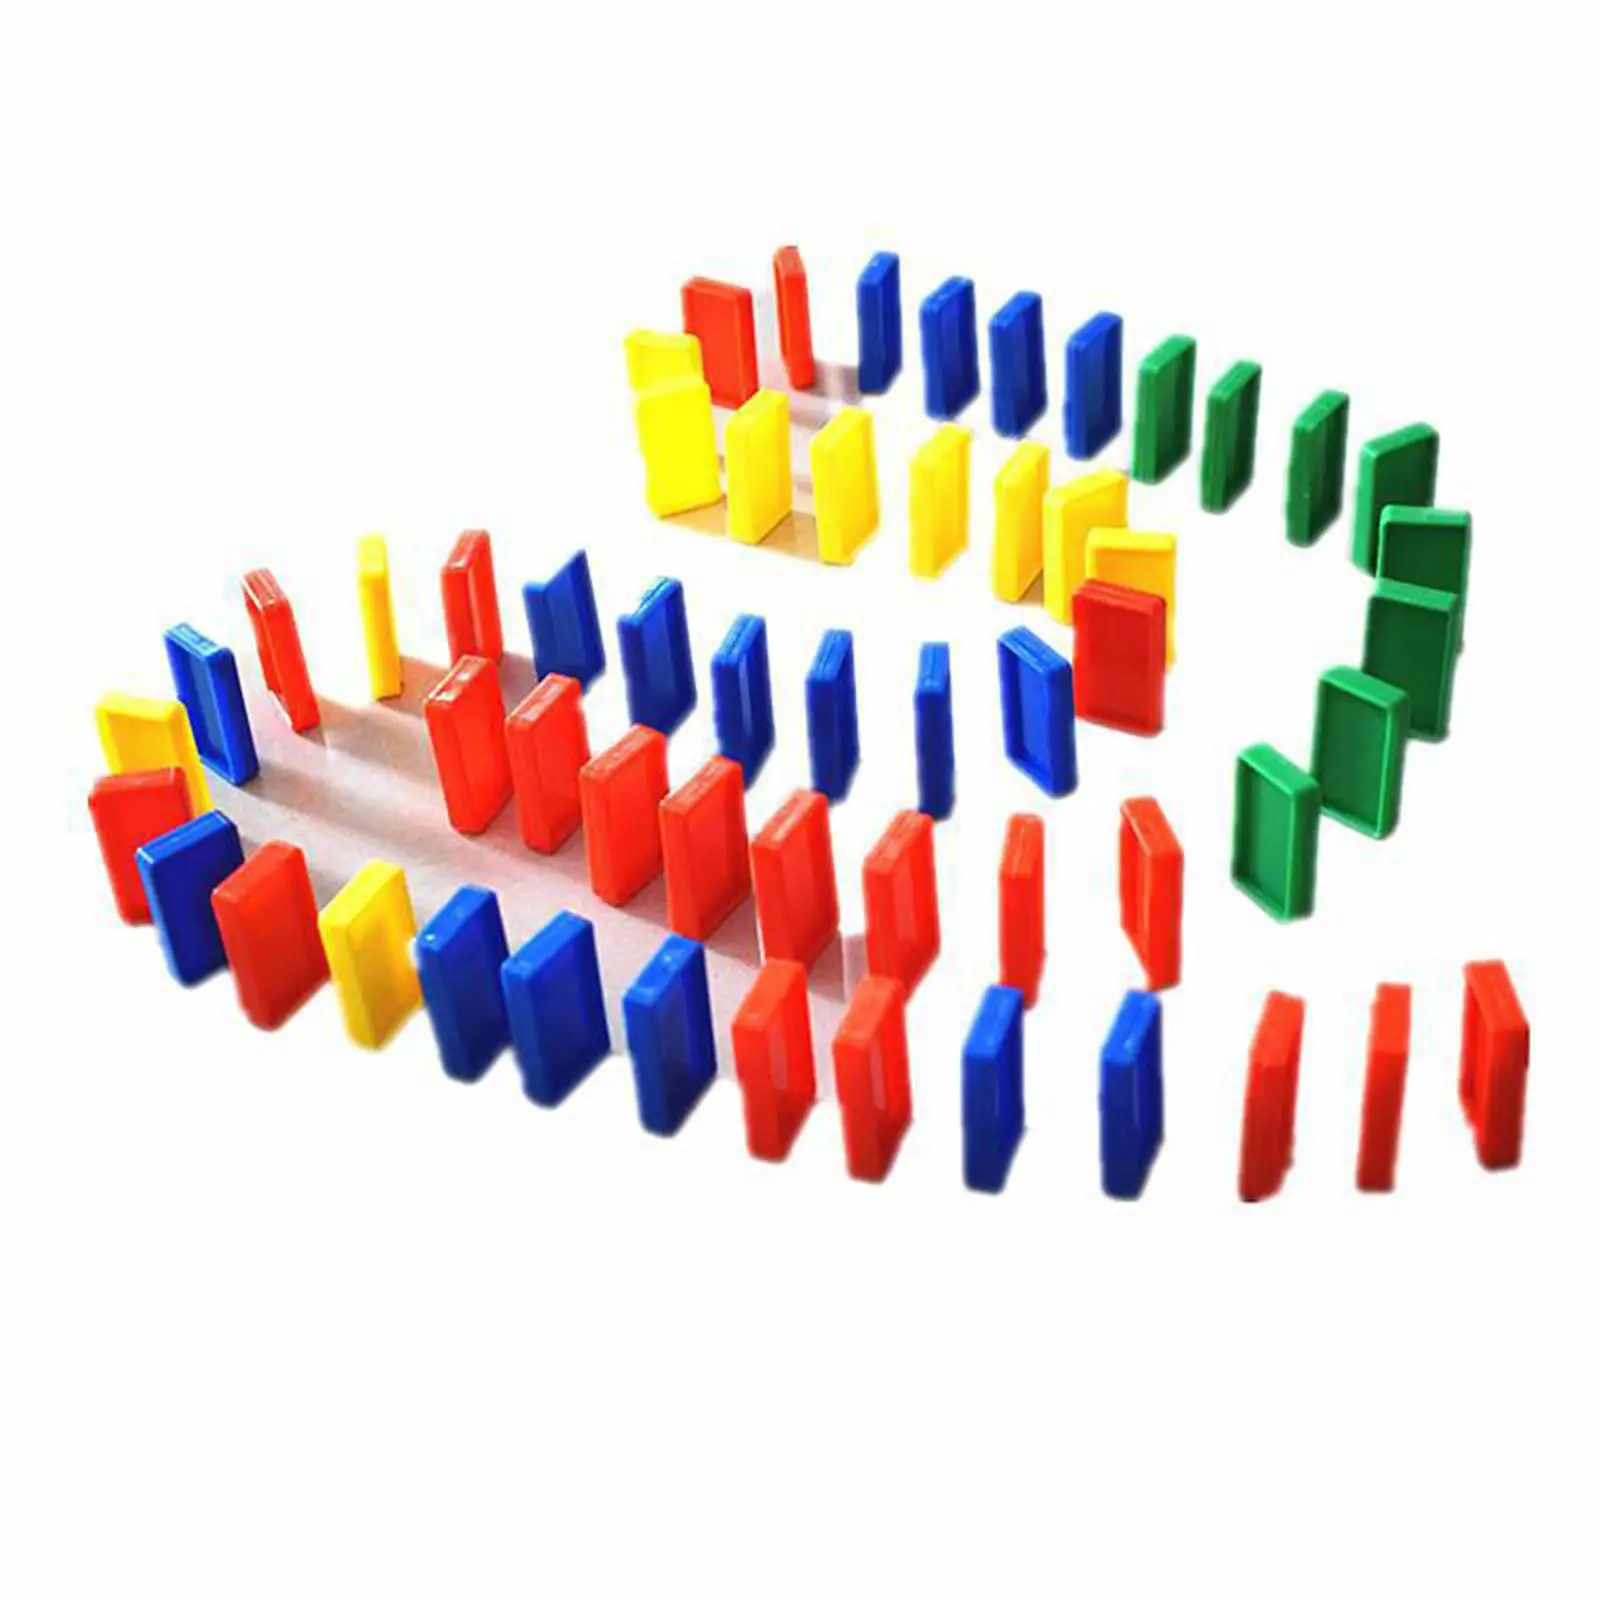 100 Pieces Colorful Dominoes Blocks Educational Play Toy Stacking Toy Building for Girls Boys Toddler Children Creative Gifts